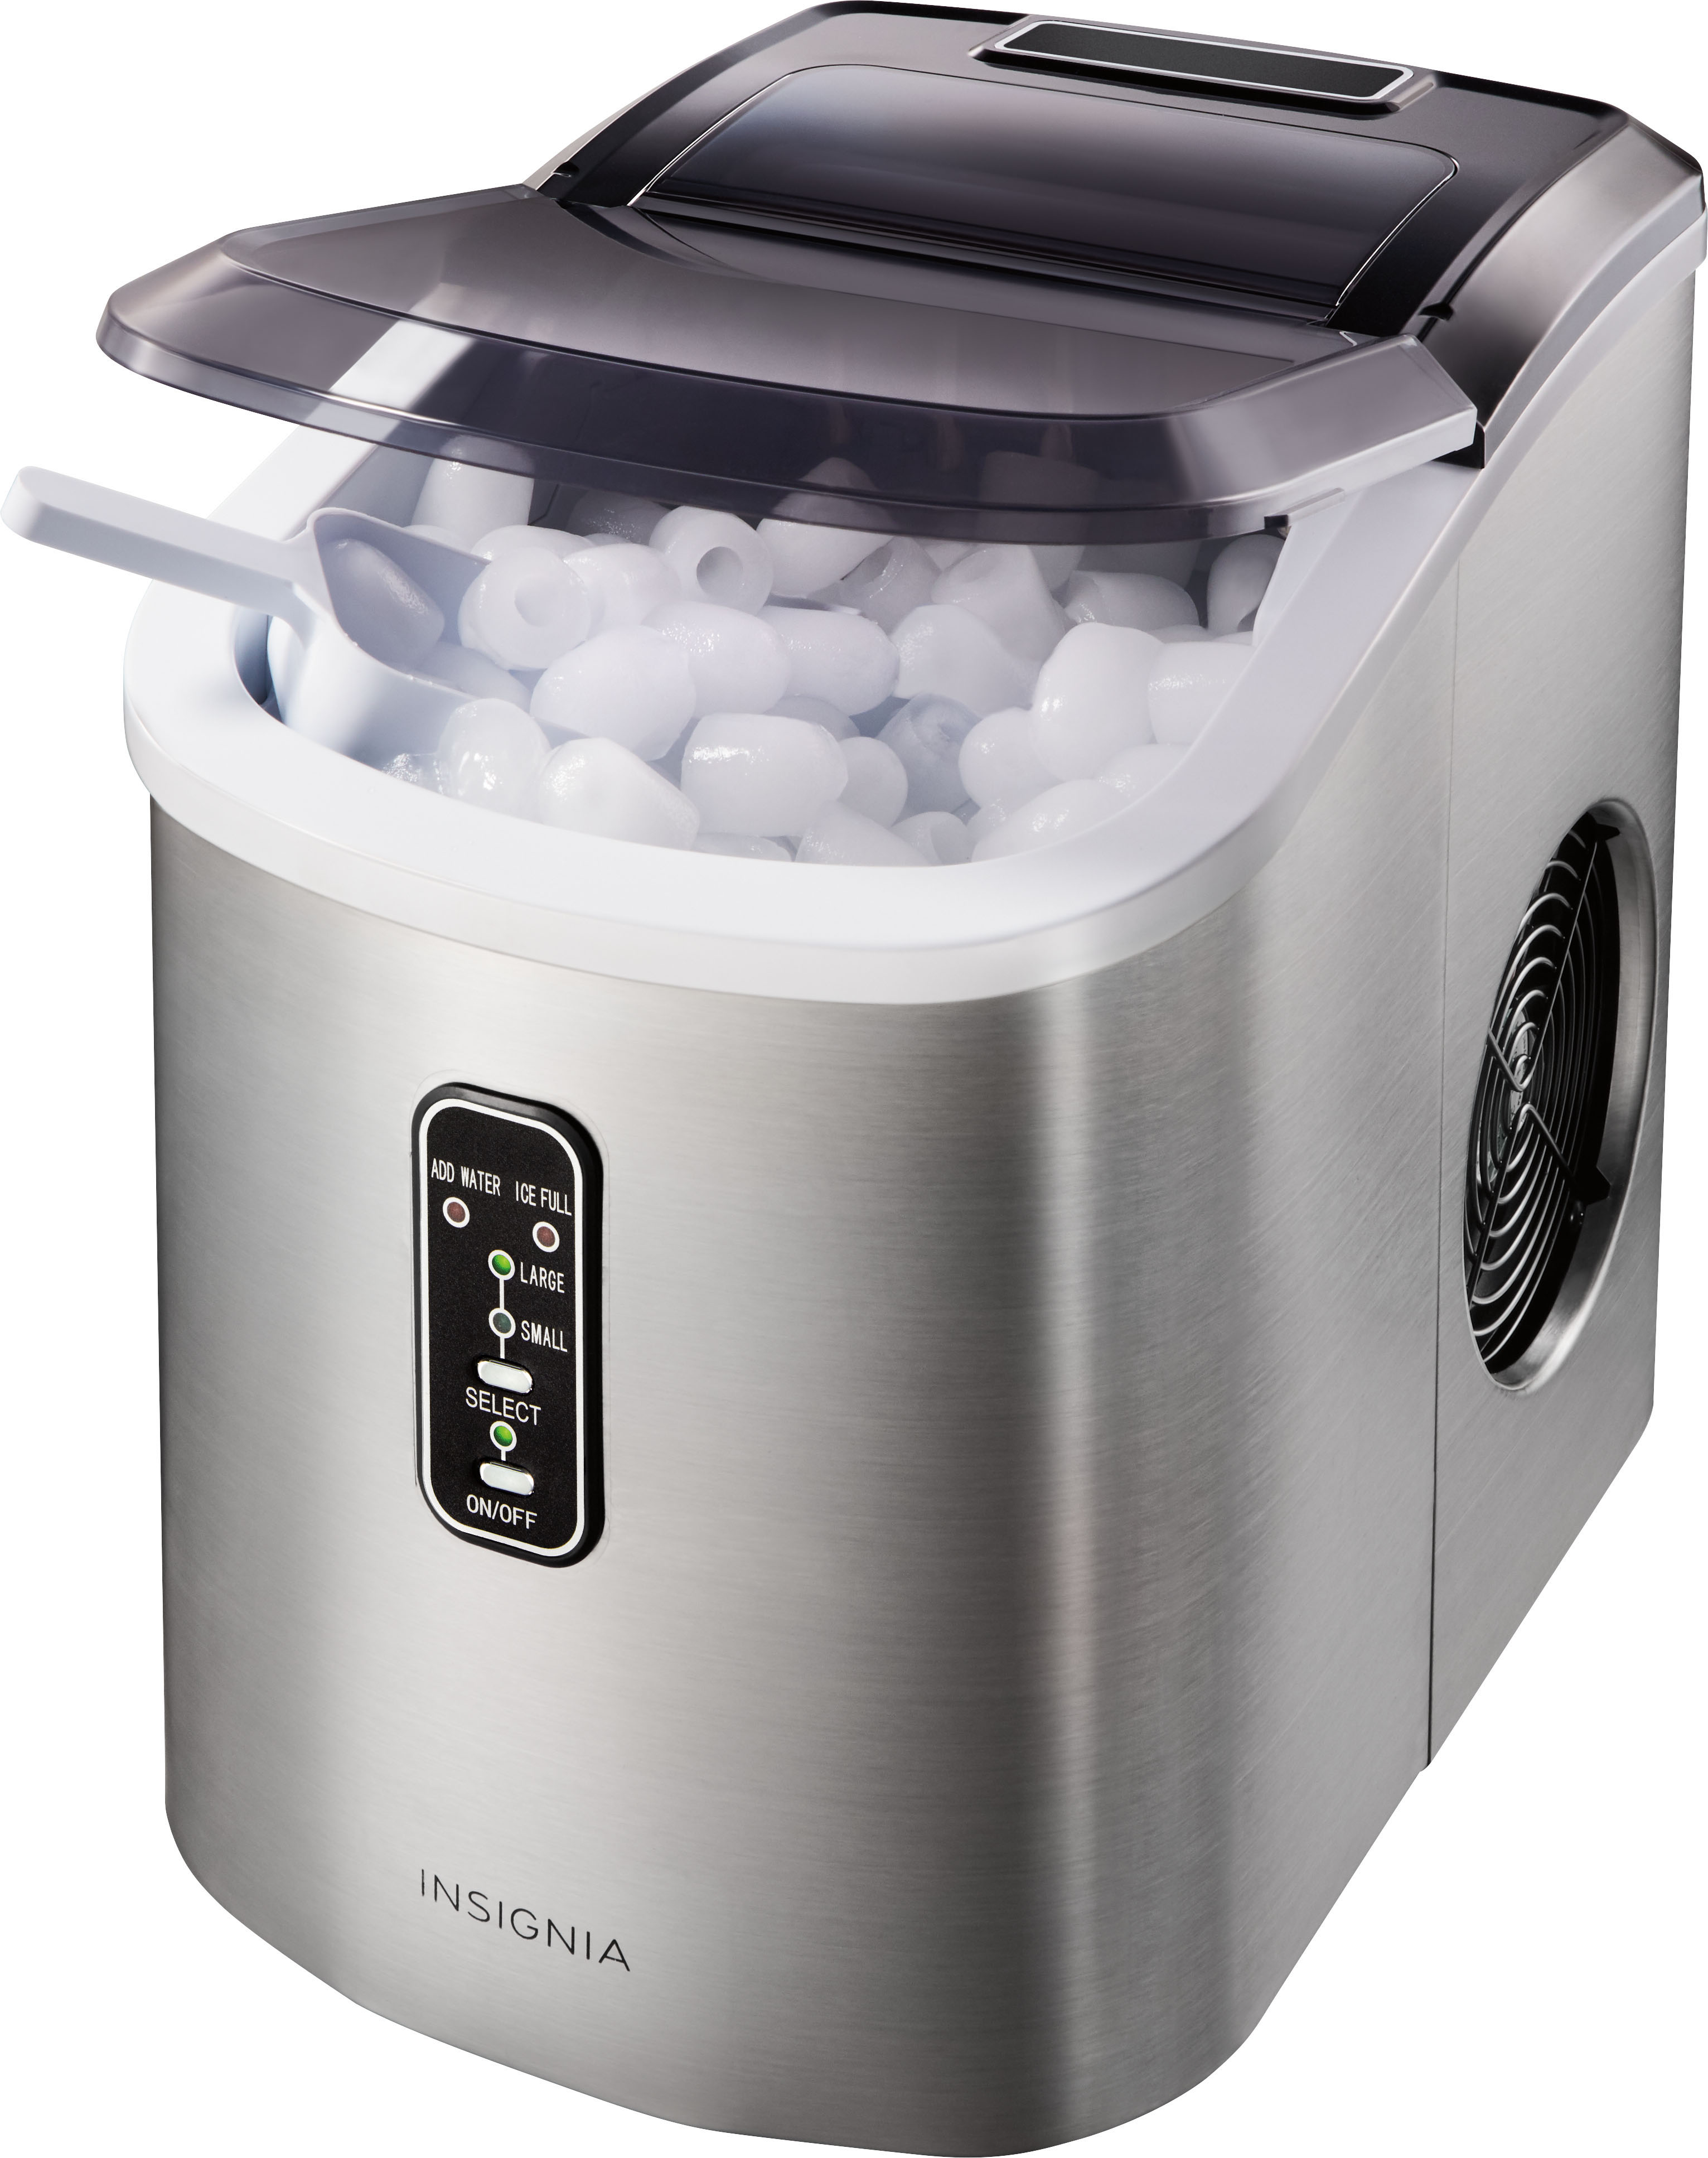 Insignia 26-lb. Stainless Steel Portable Ice Maker